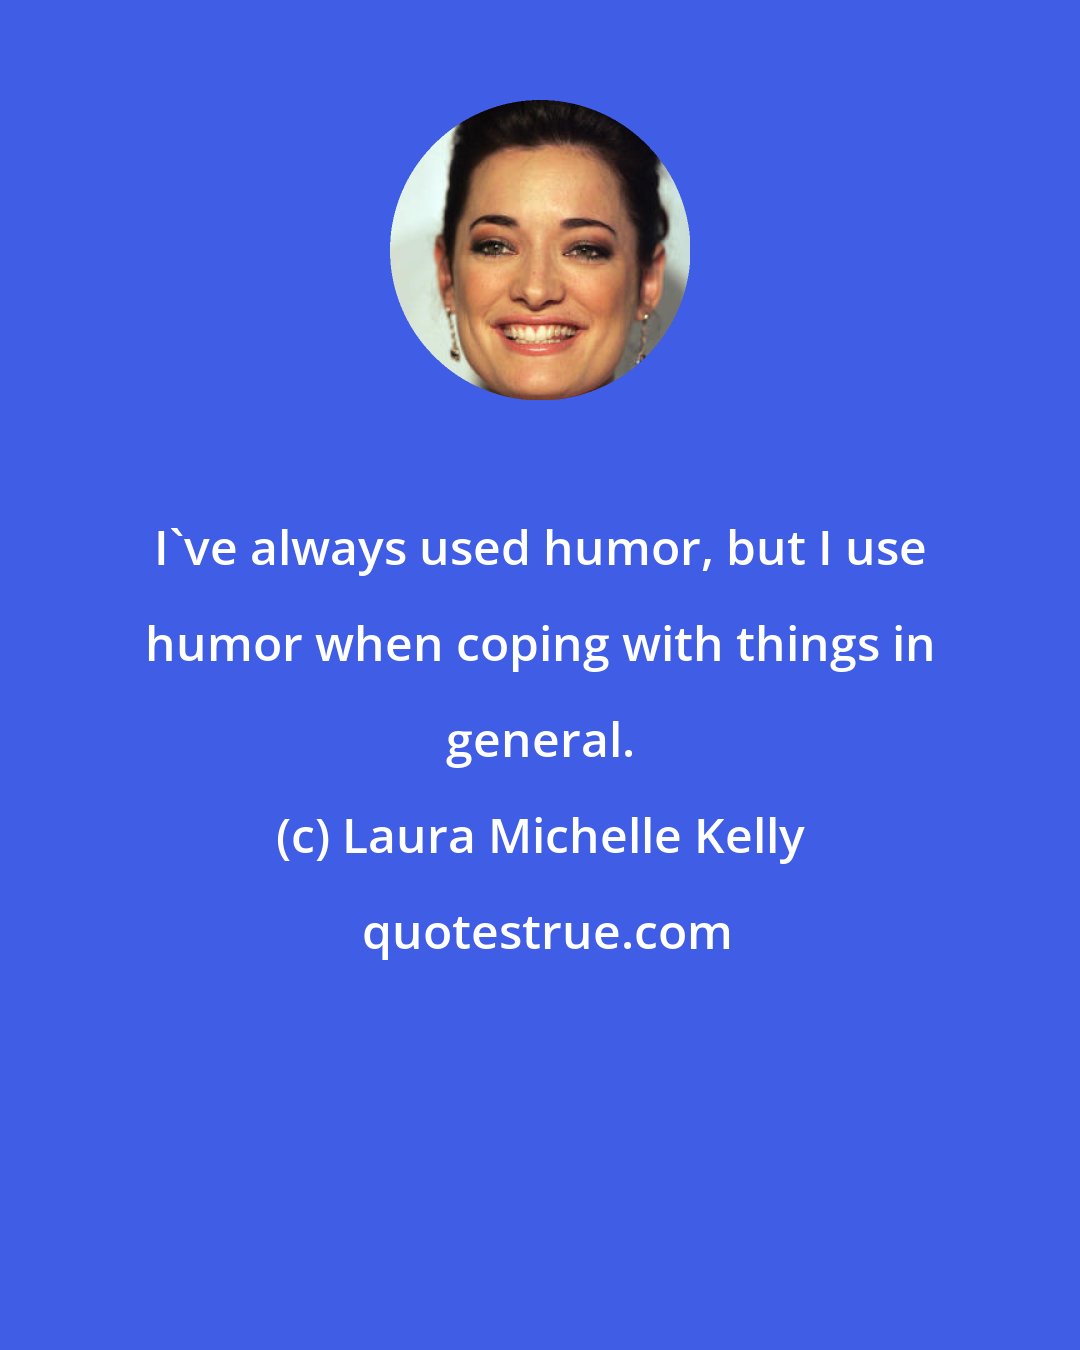 Laura Michelle Kelly: I've always used humor, but I use humor when coping with things in general.